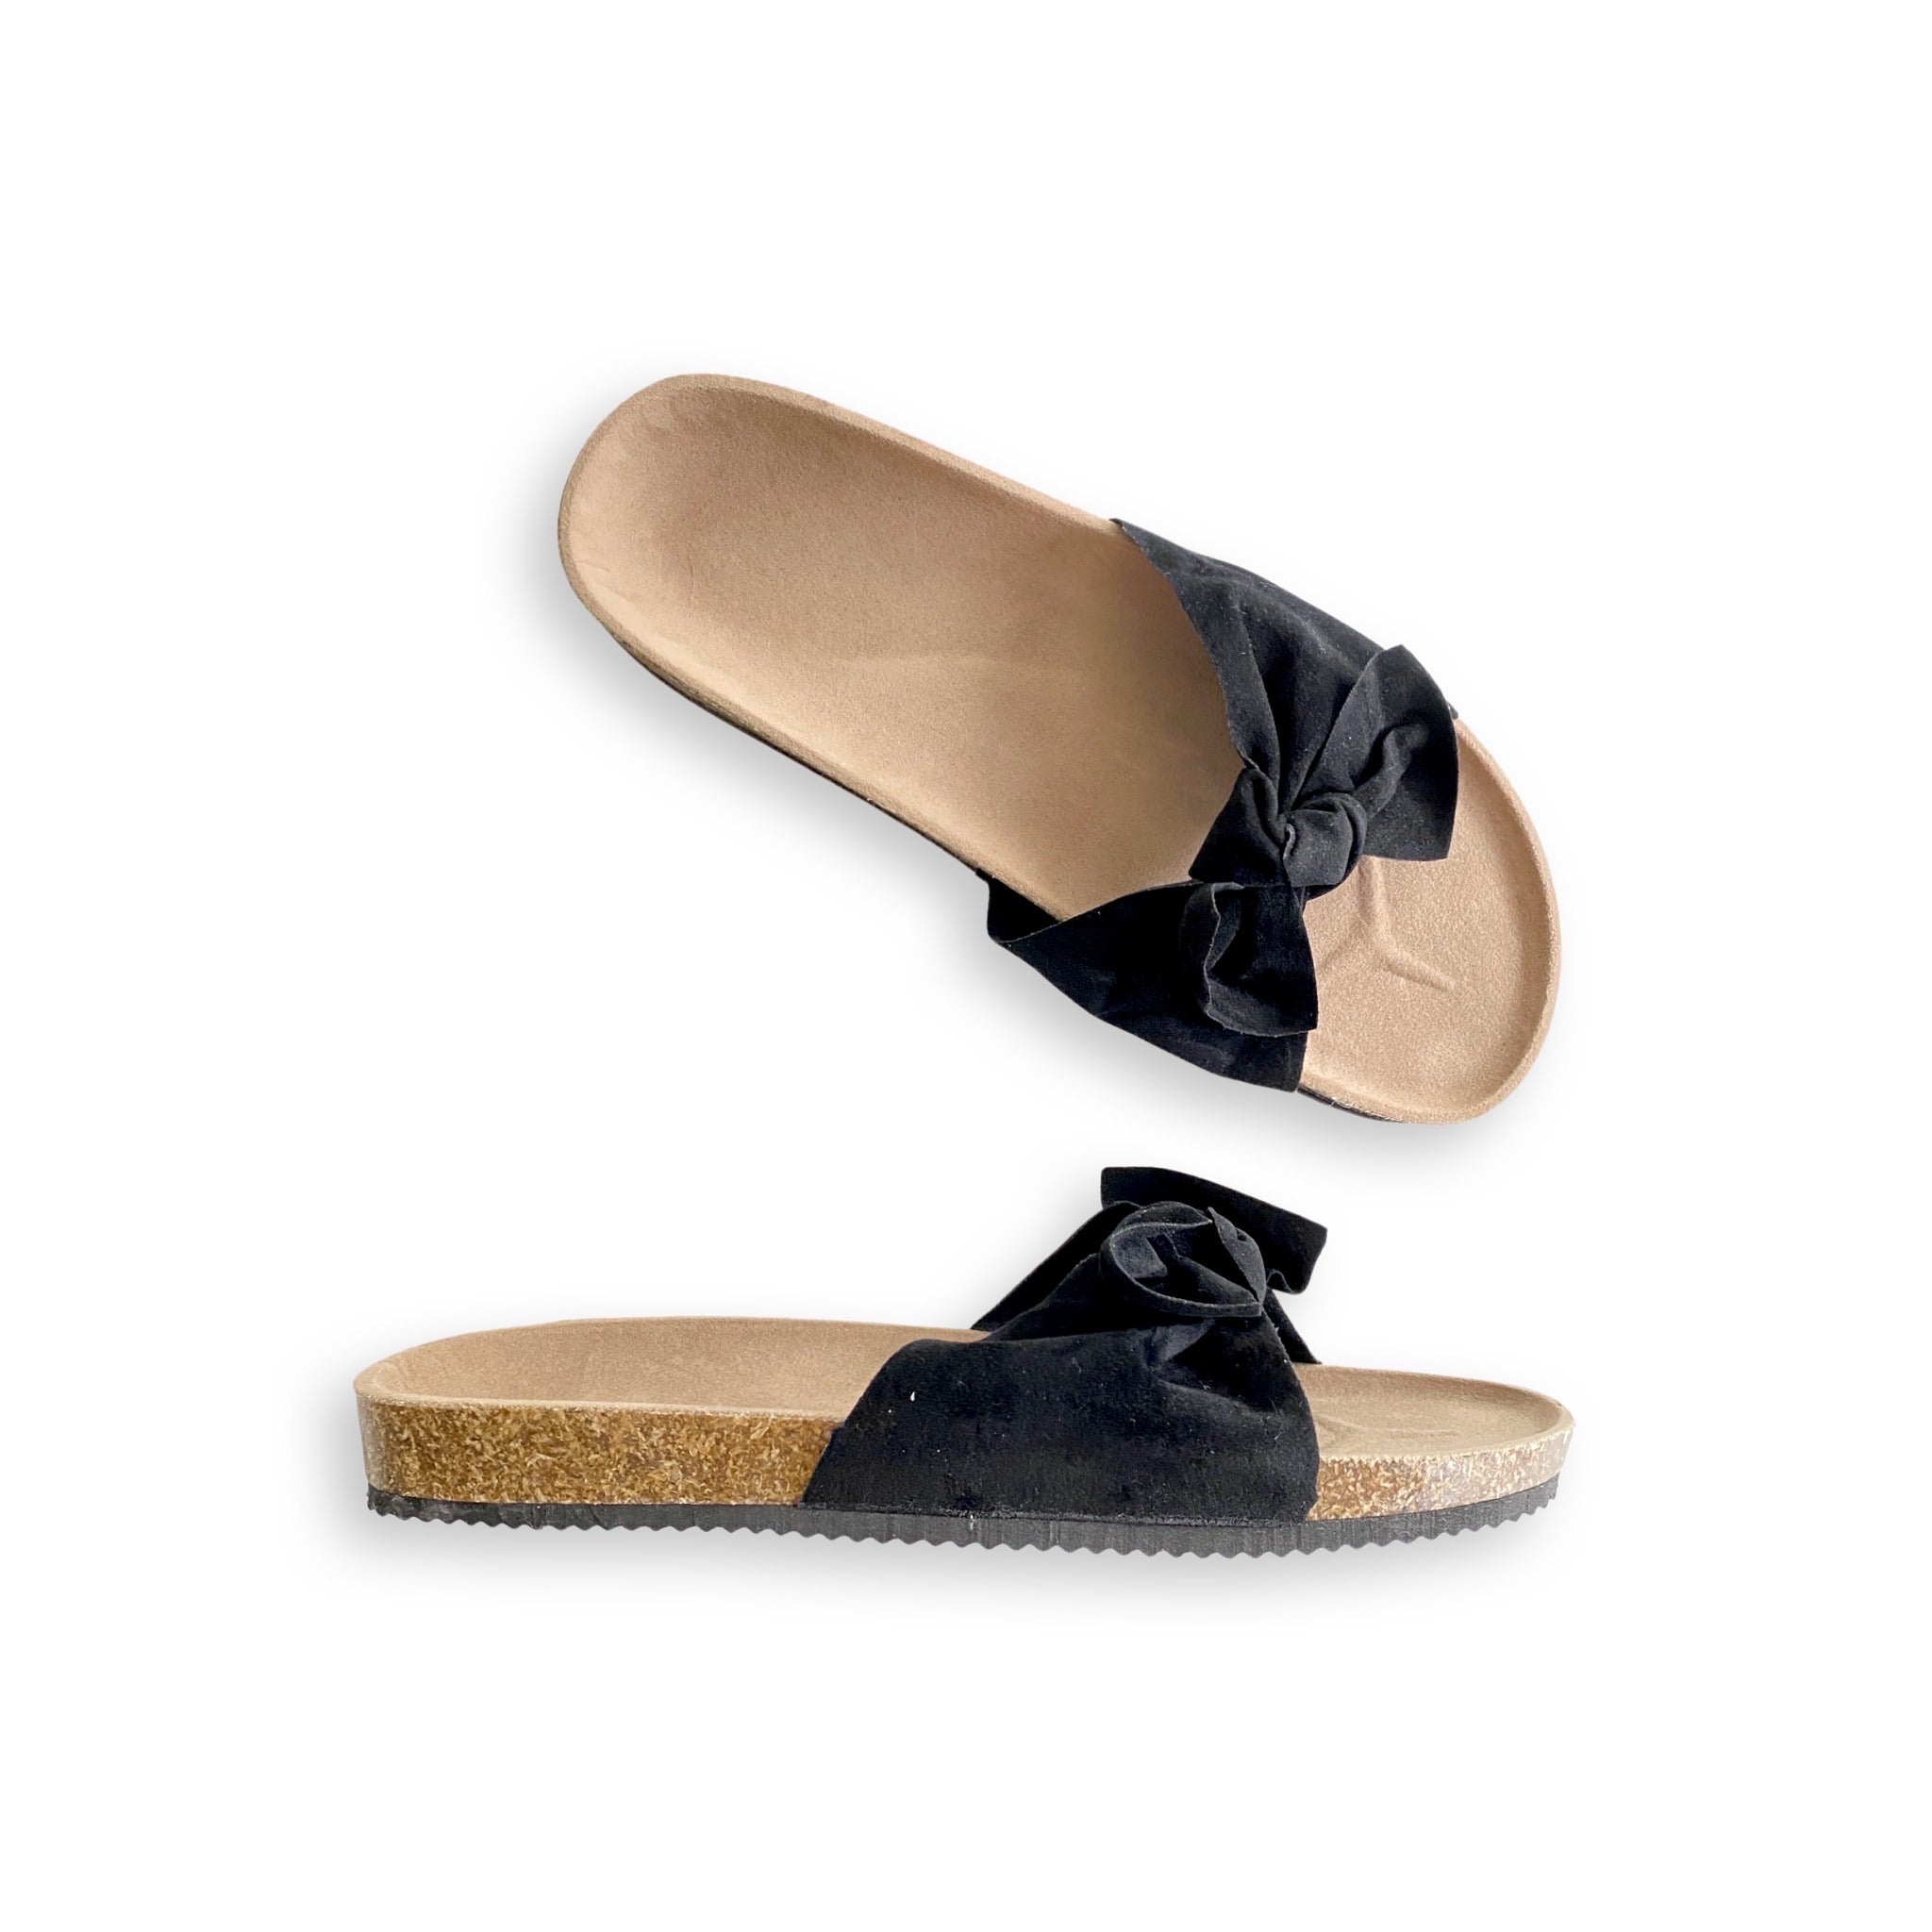 {ONLINE EXCLUSIVE} Beauty and Bows Sandals